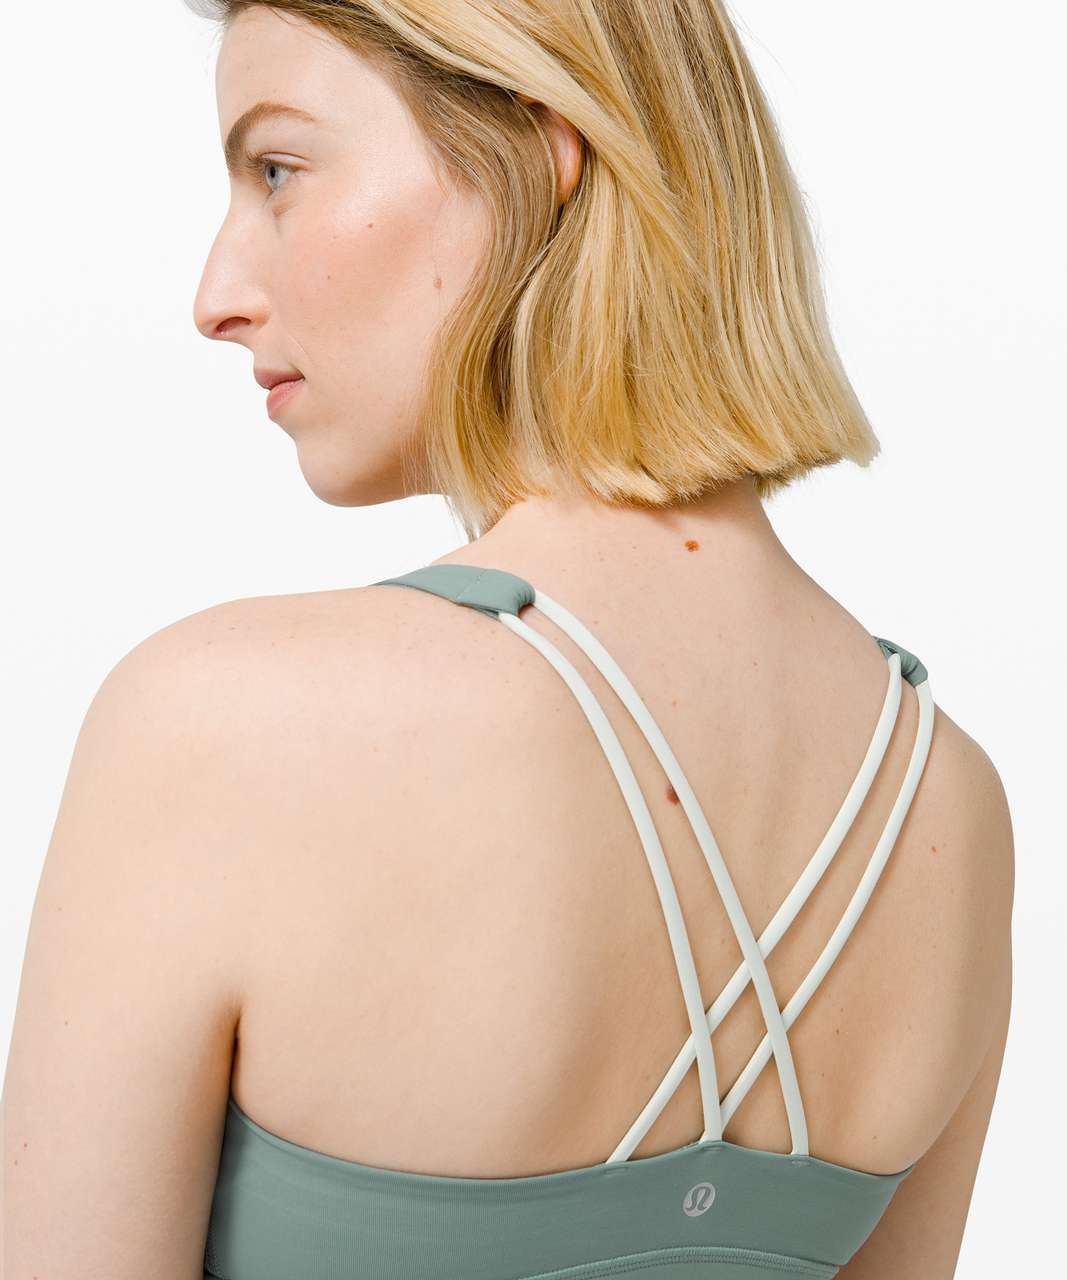 Lululemon Free To Be Bra *Light Support, A/B Cup (Online Only) - Tidewater Teal / Springtime